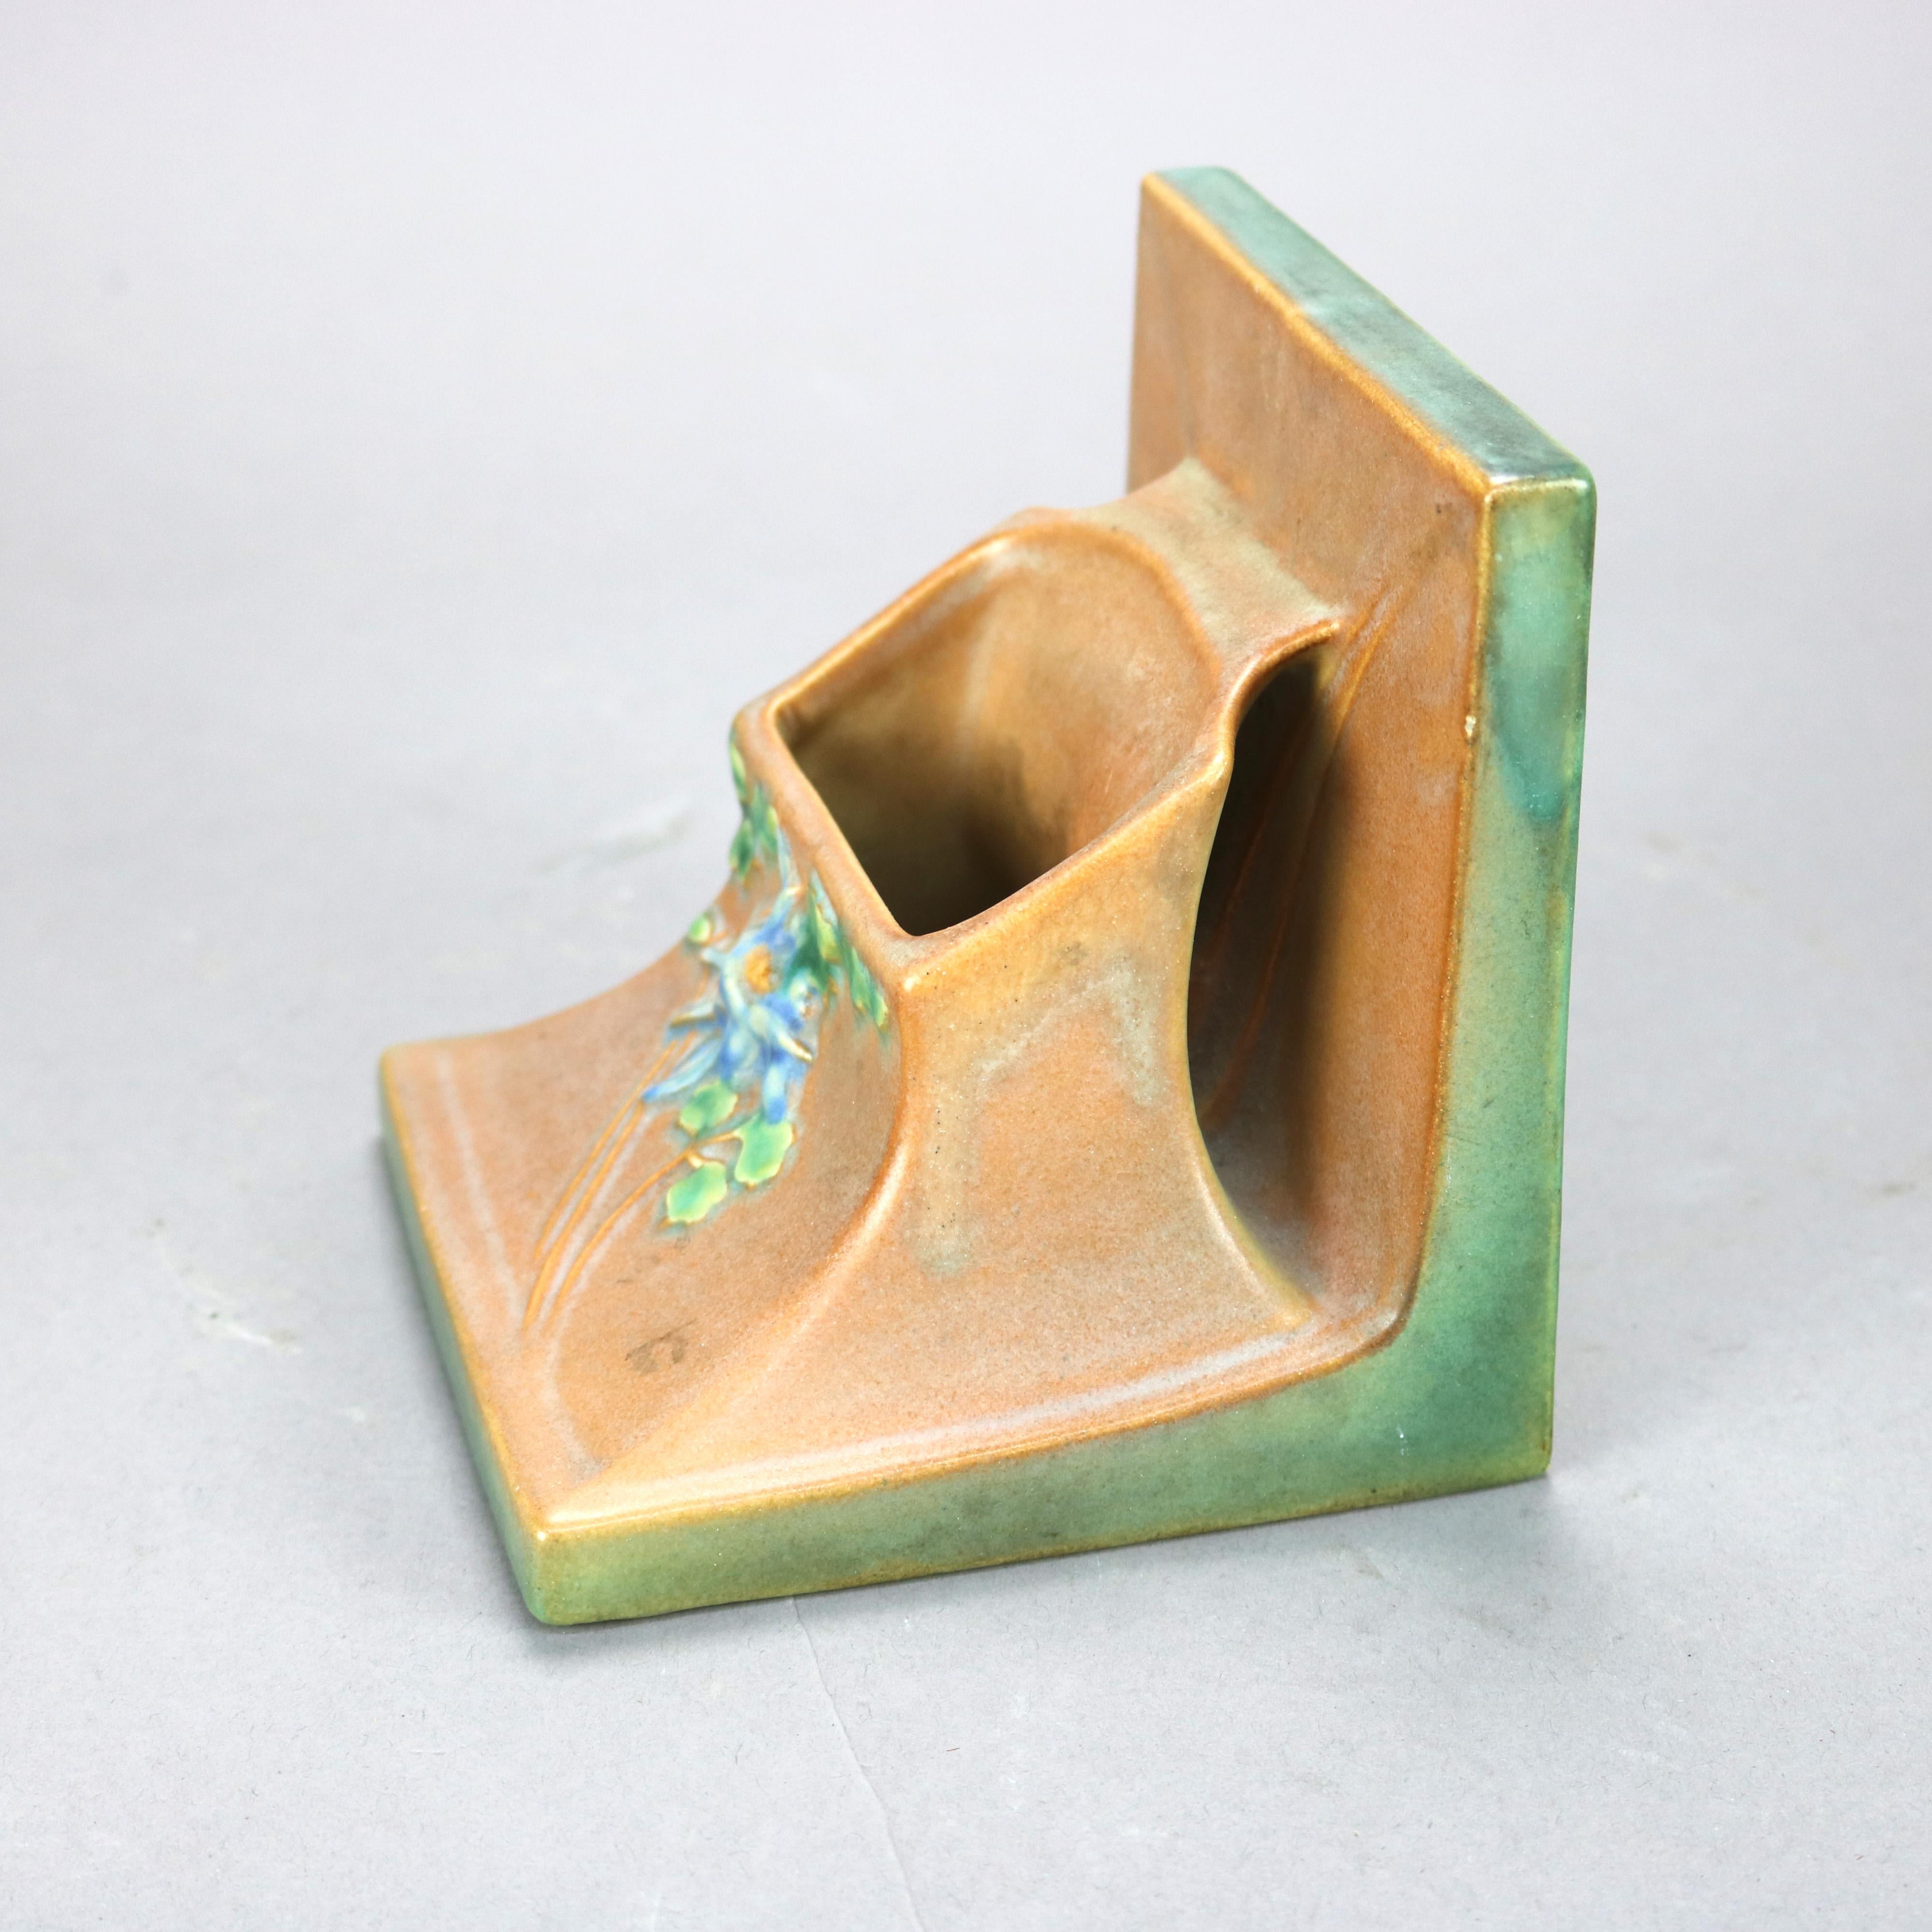 An antique vase by Roseville offers art pottery construction with bookend form having floral element in relief, base signed as photographed, c1930

Measures - 5.25'' H x 5.25'' W x 5.25'' D.

Catalogue Note: Ask about DISCOUNTED DELIVERY RATES